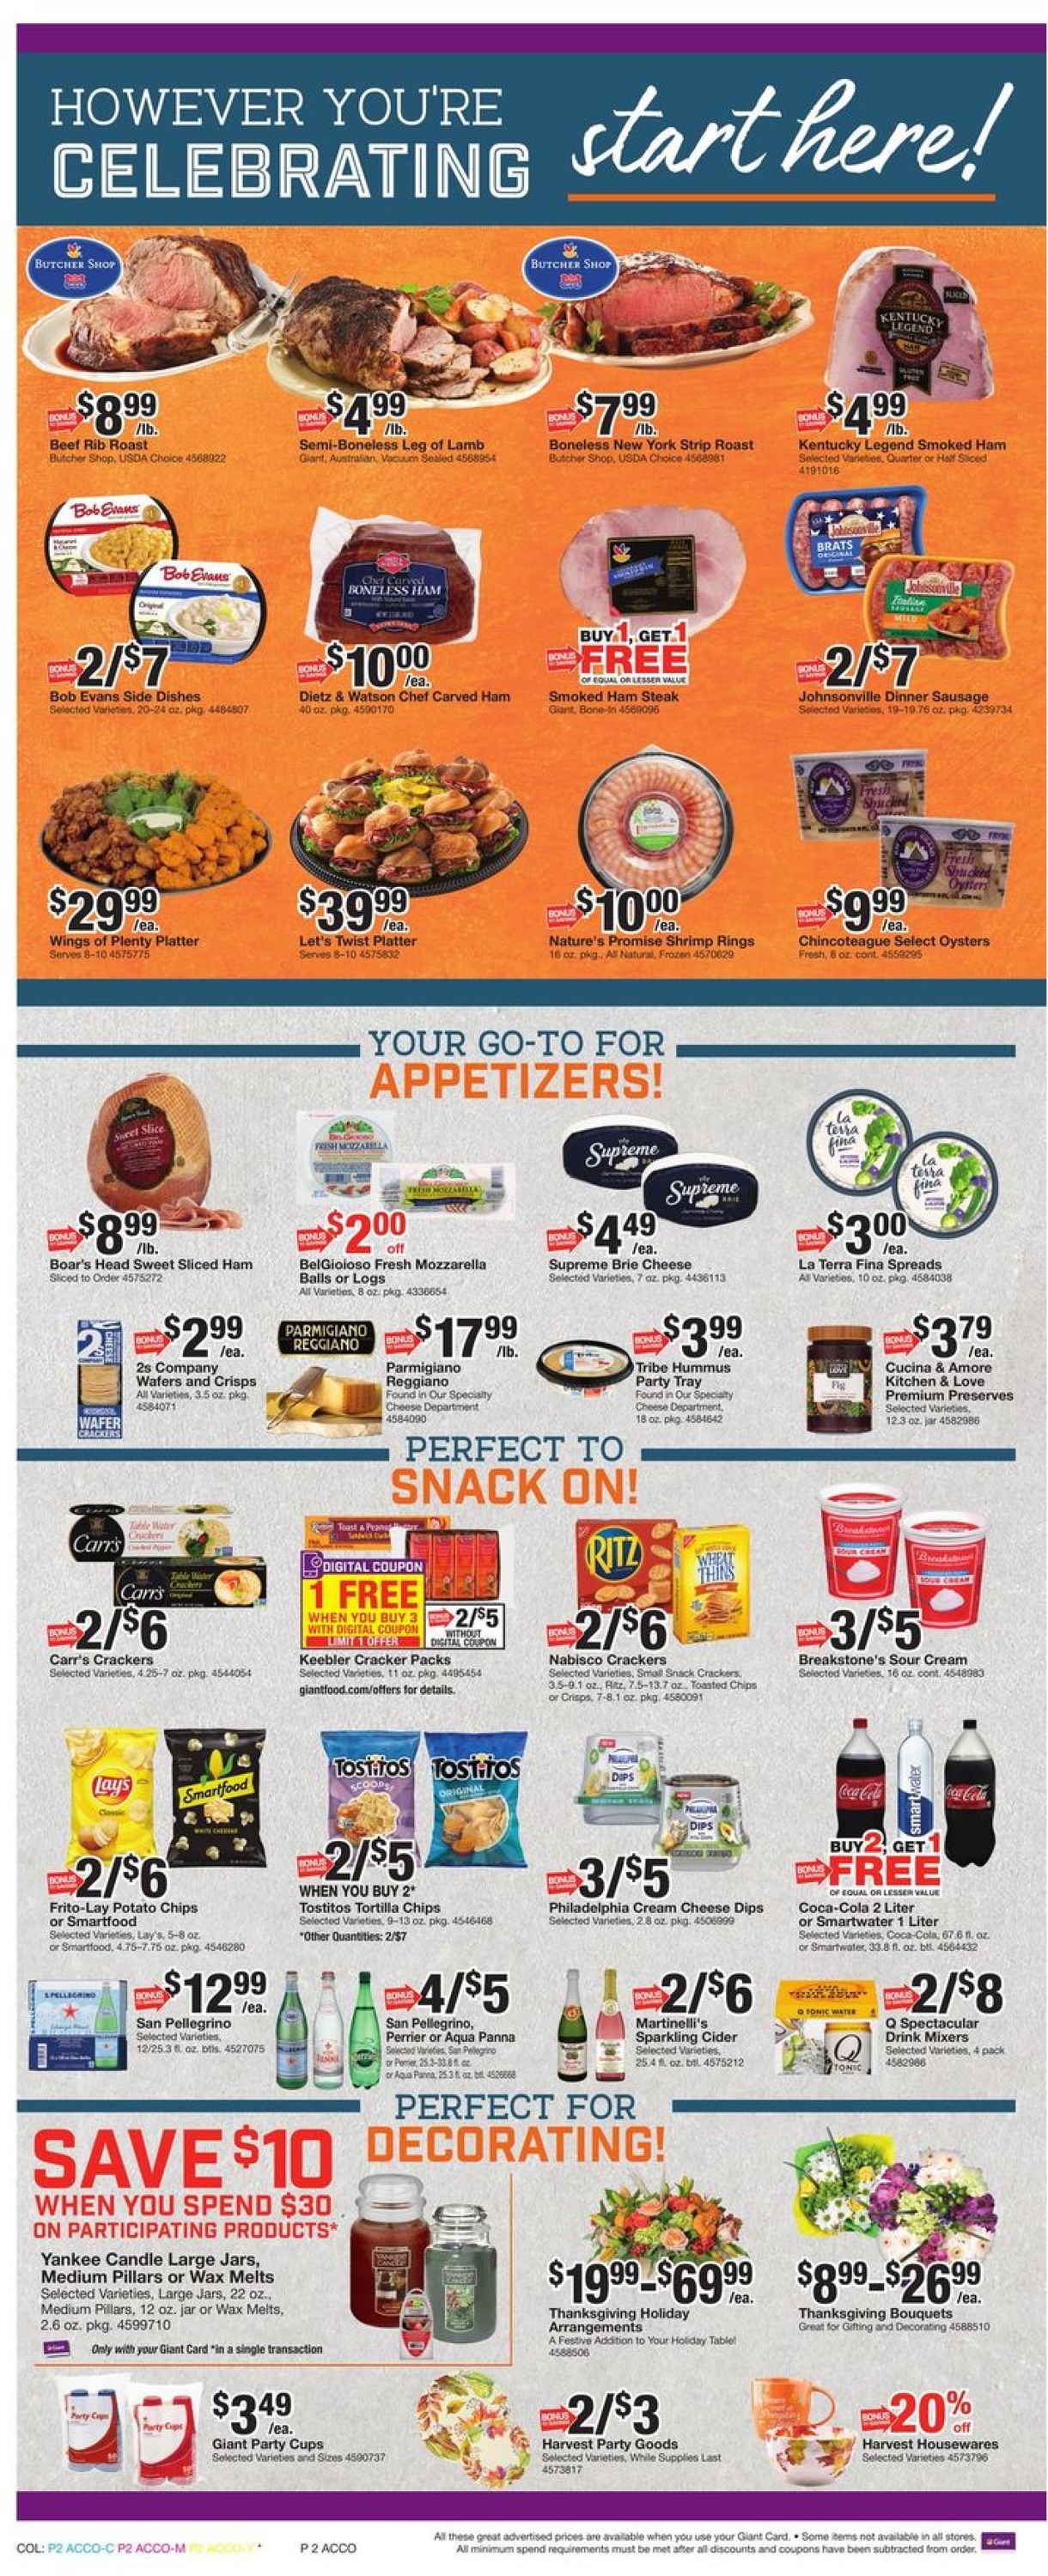 Giant Food Thanksgiving 2020 Weekly Ad Circular - valid 11/20-11/26/2020 (Page 5)